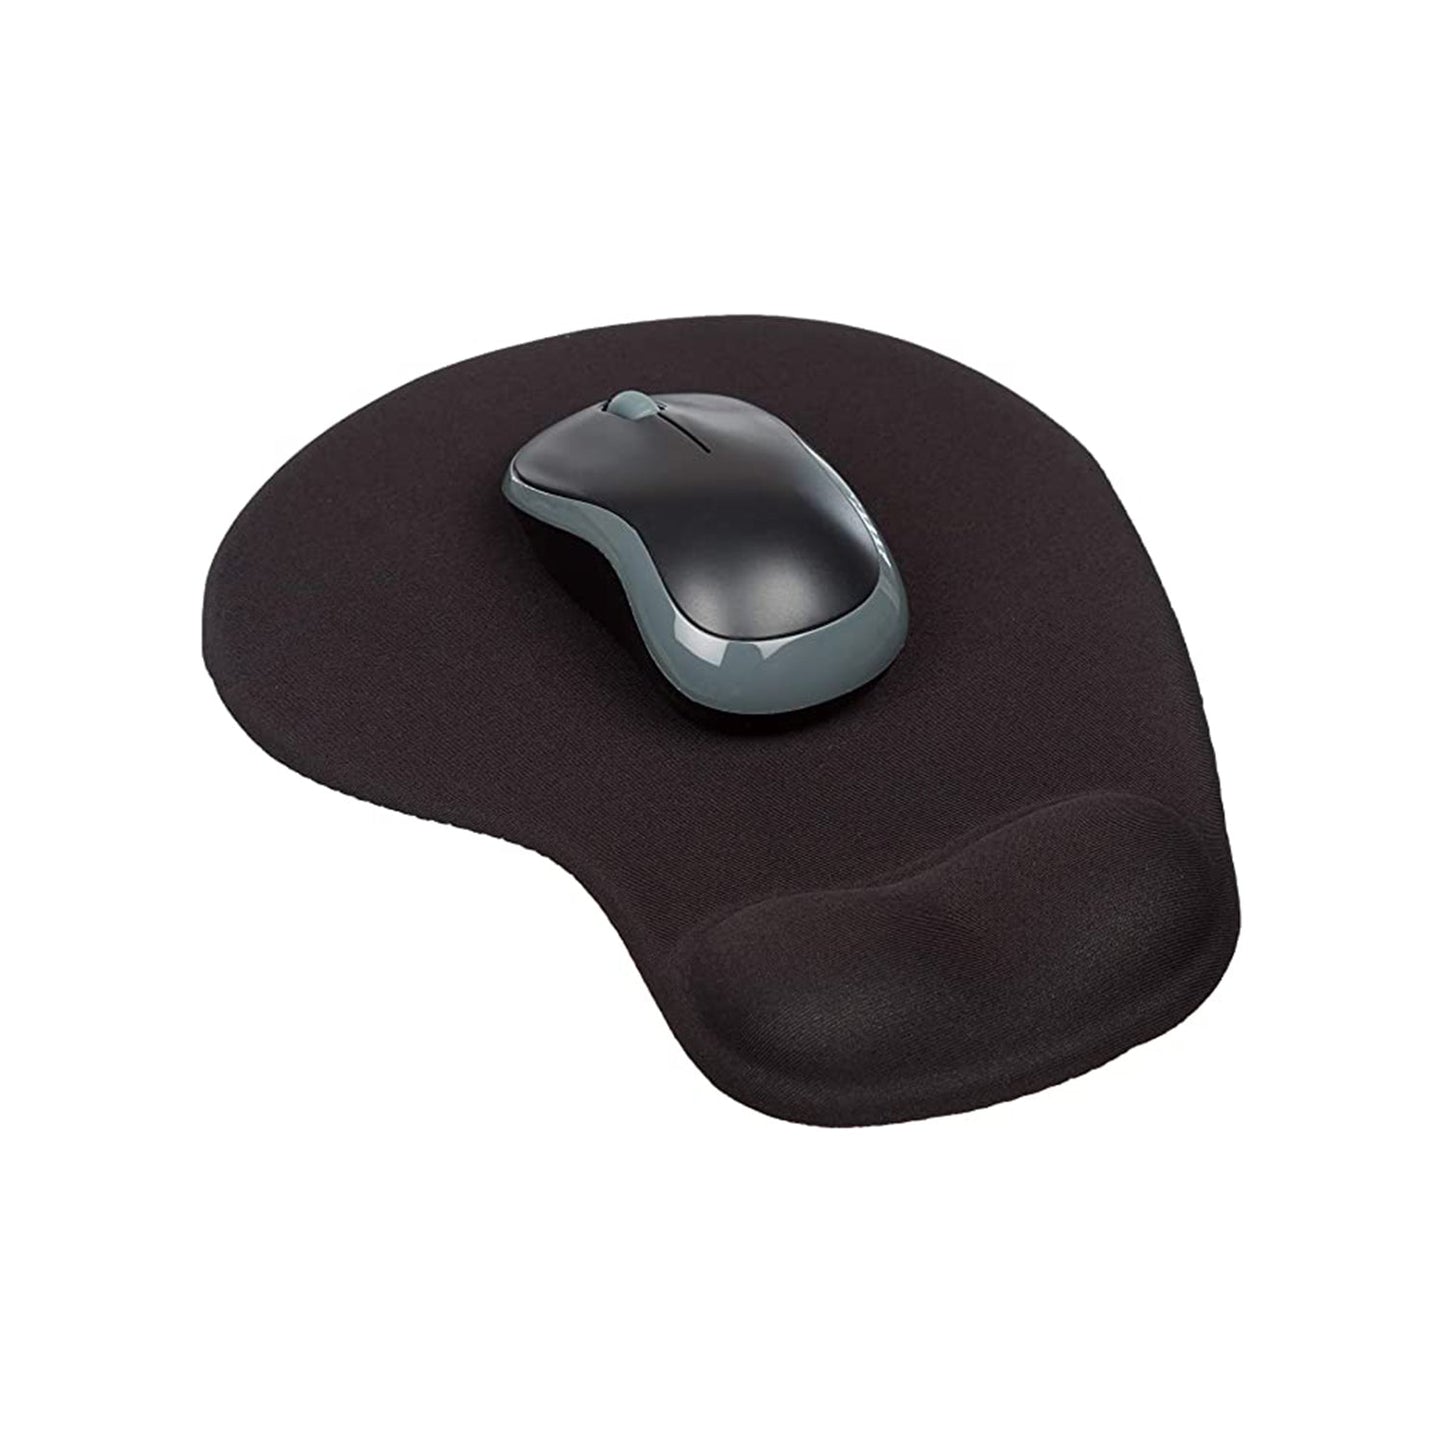 6161 Wrist S Mouse Pad Used For Mouse While Using Computer. DeoDap